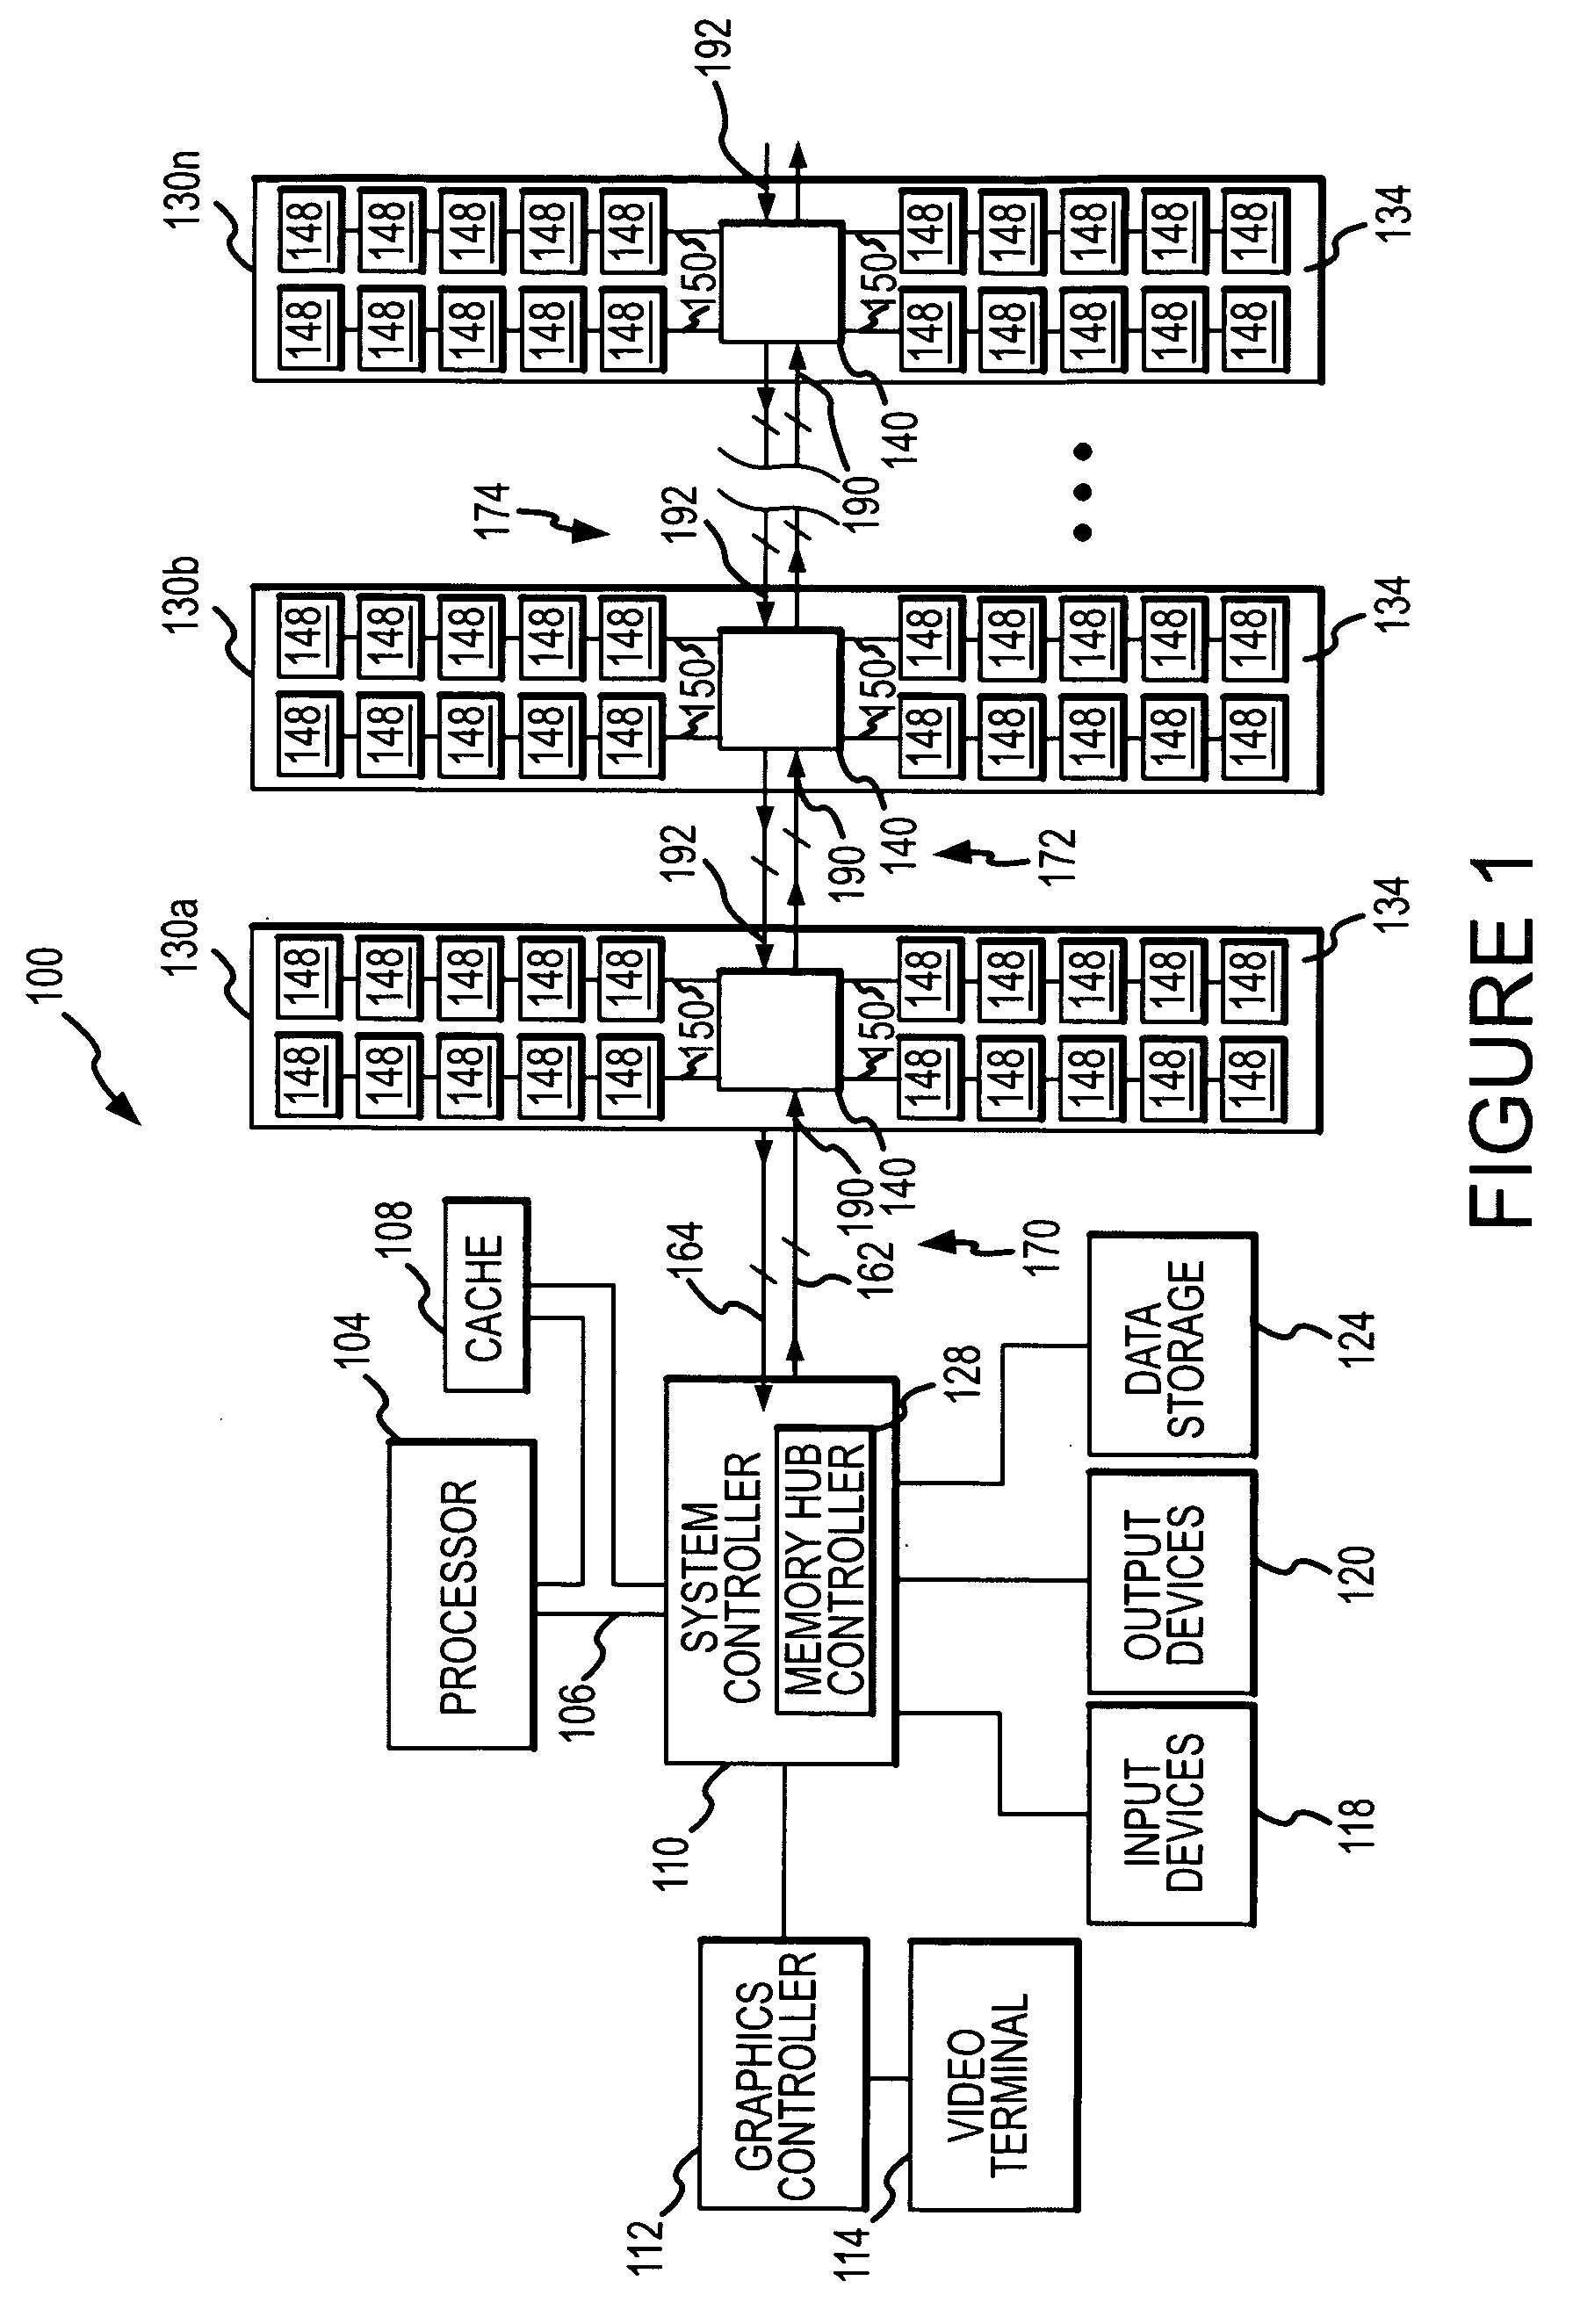 System and method for re-routing signals between memory system components